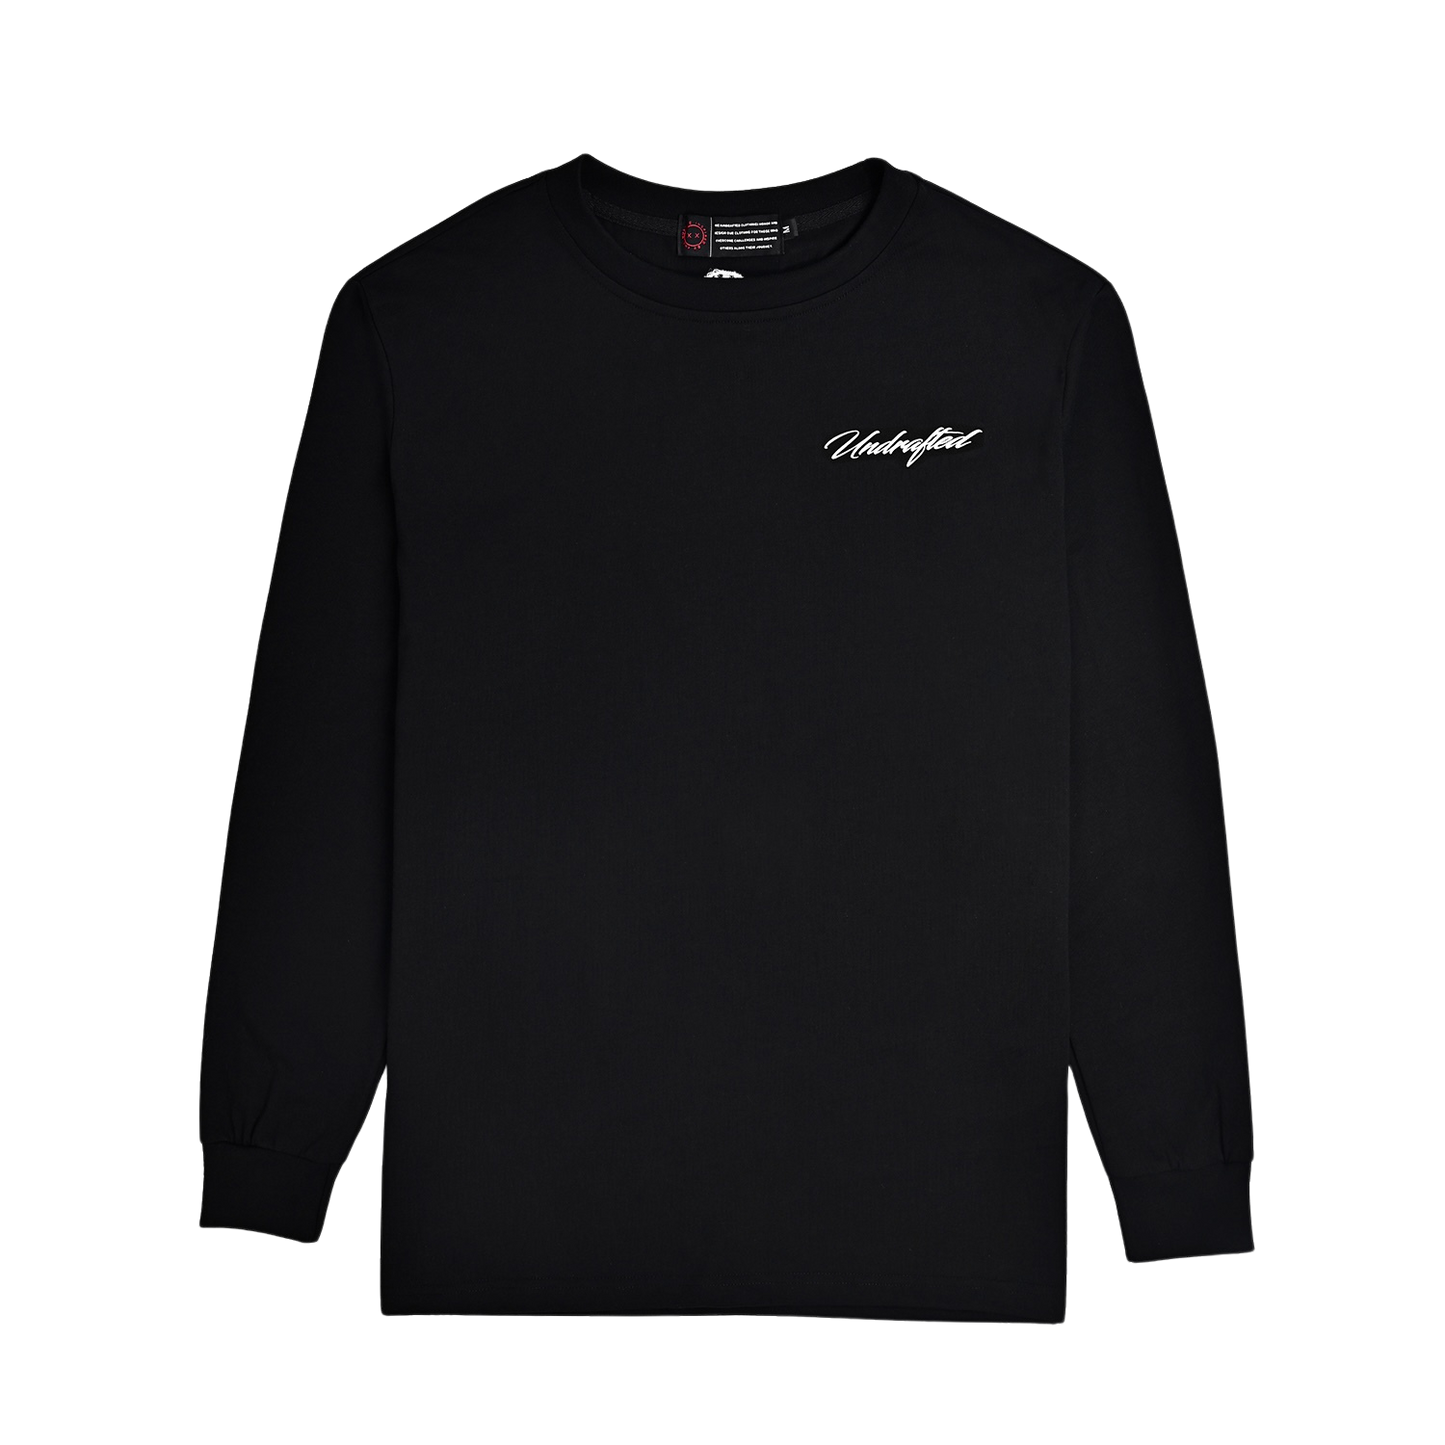 Undrafted Long Sleeve T-Shirt